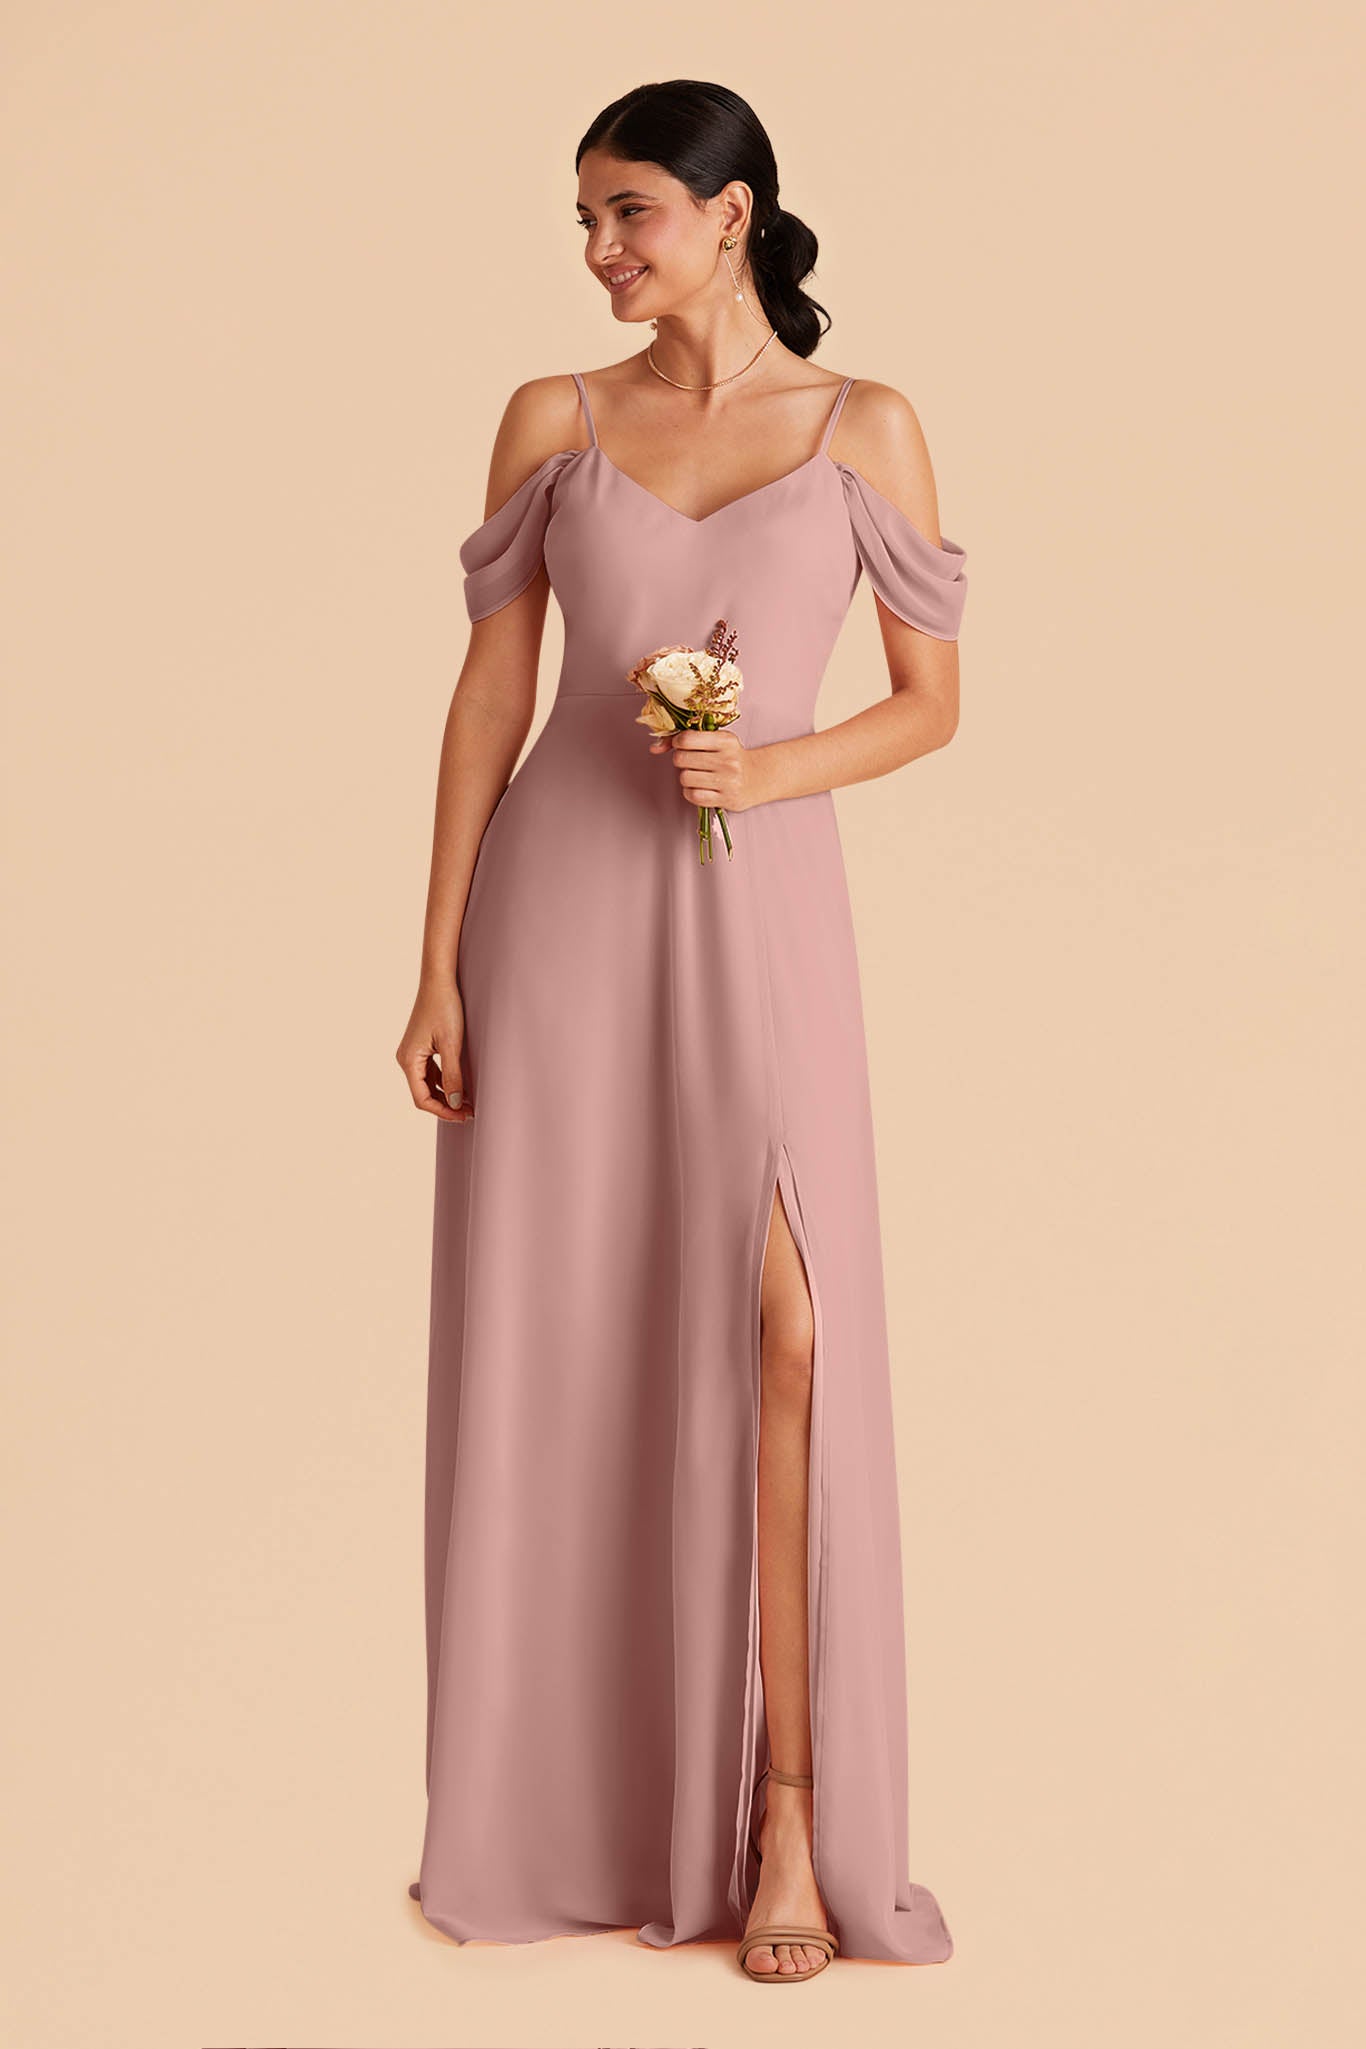 English Rose Devin Convertible Dress by Birdy Grey